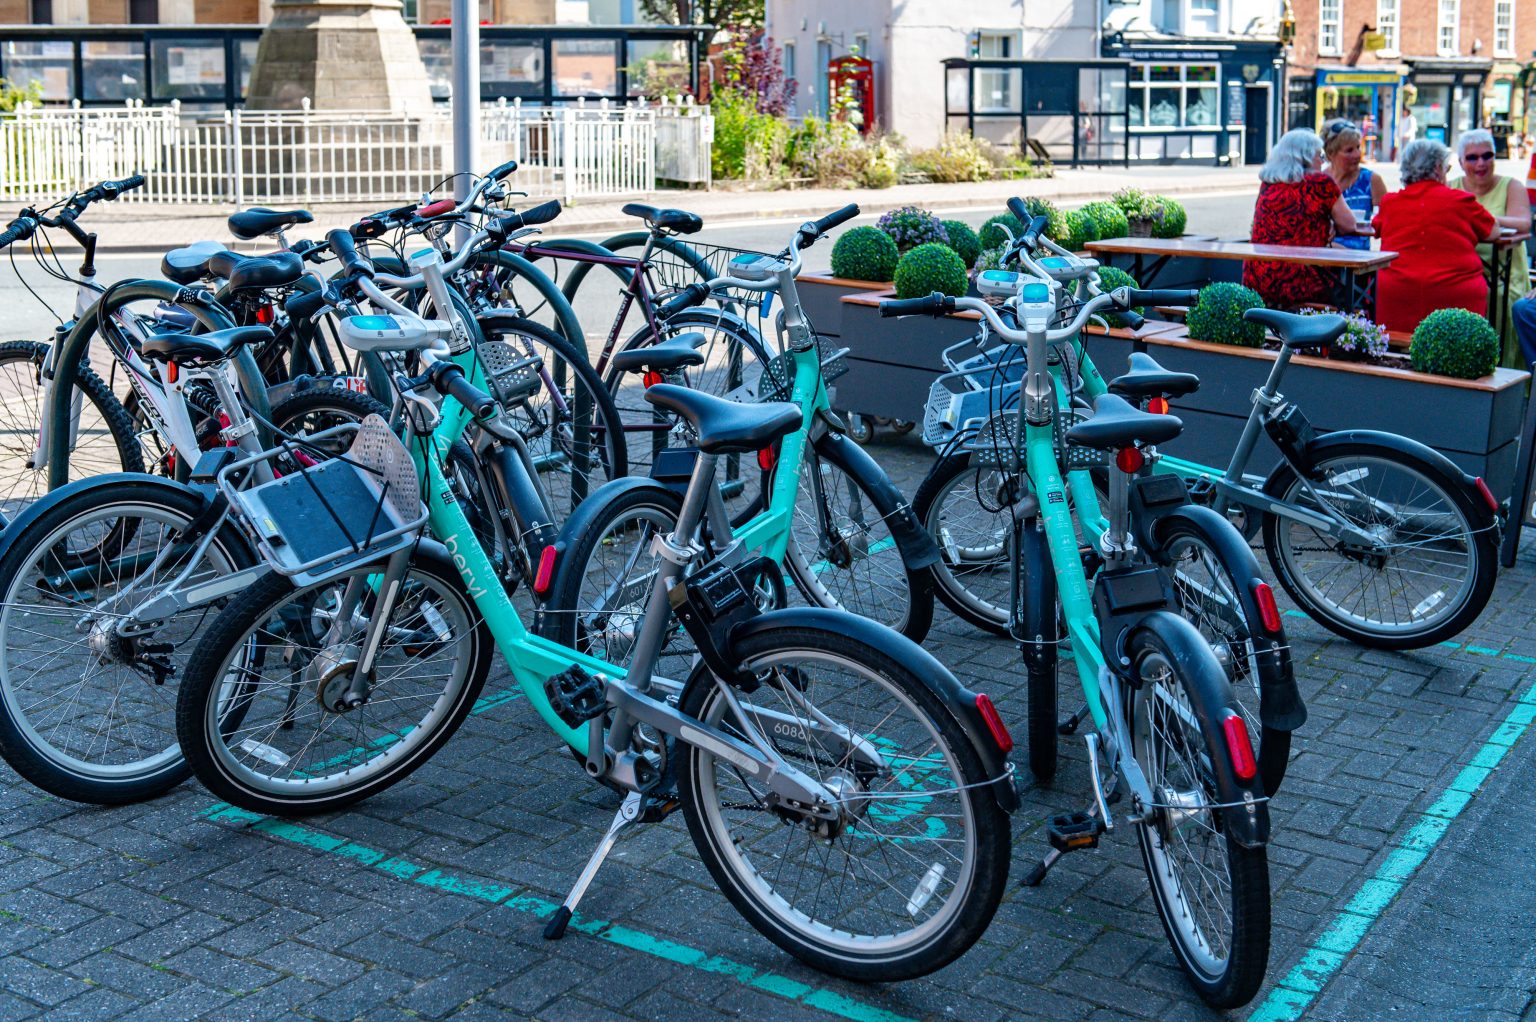 NEWS | Herefordshire Council is funding free rides of up to 60 minutes on Beryl Bikes in Hereford this weekend